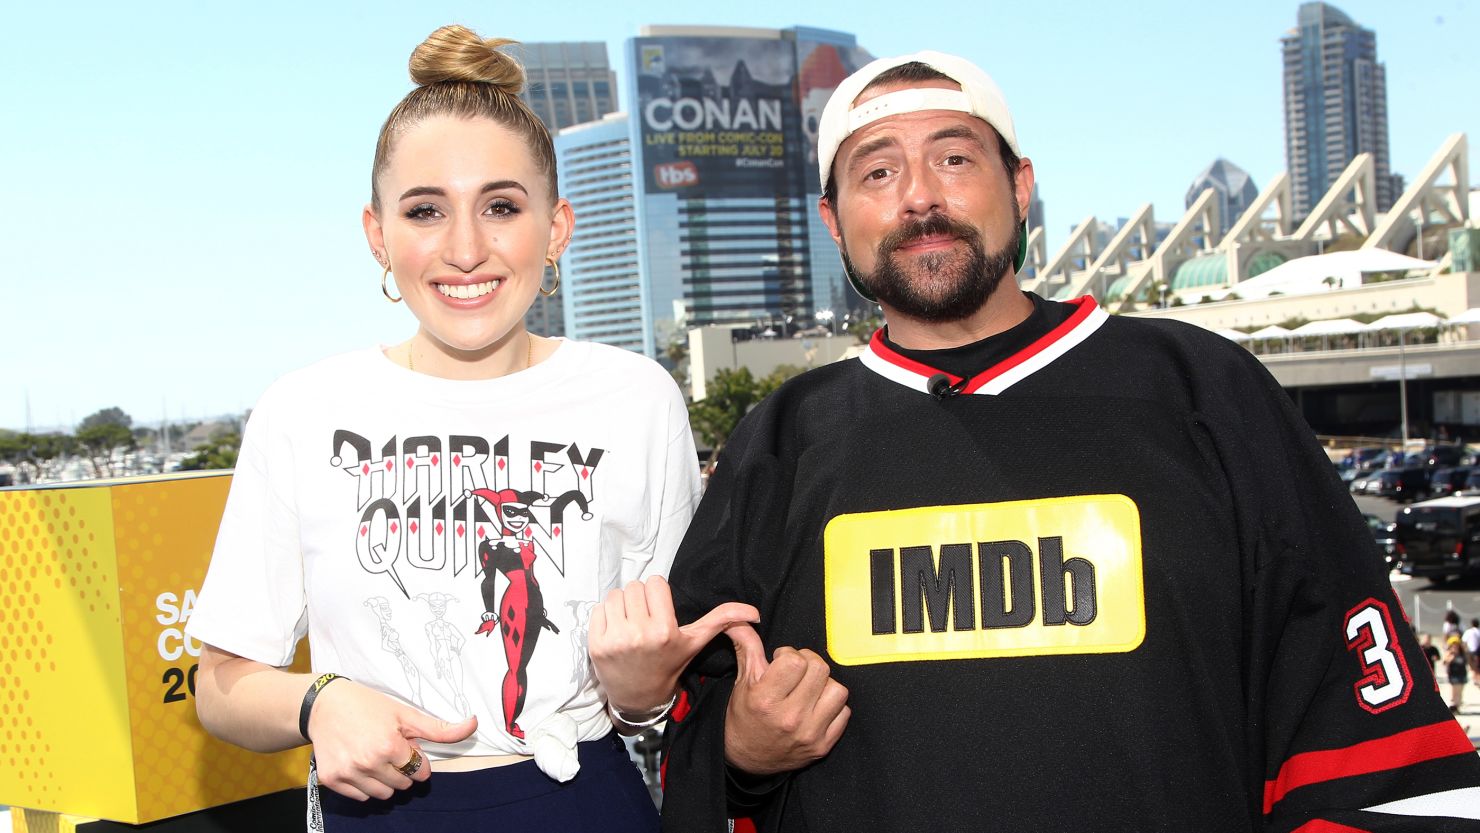 kevin smith daughter bullying